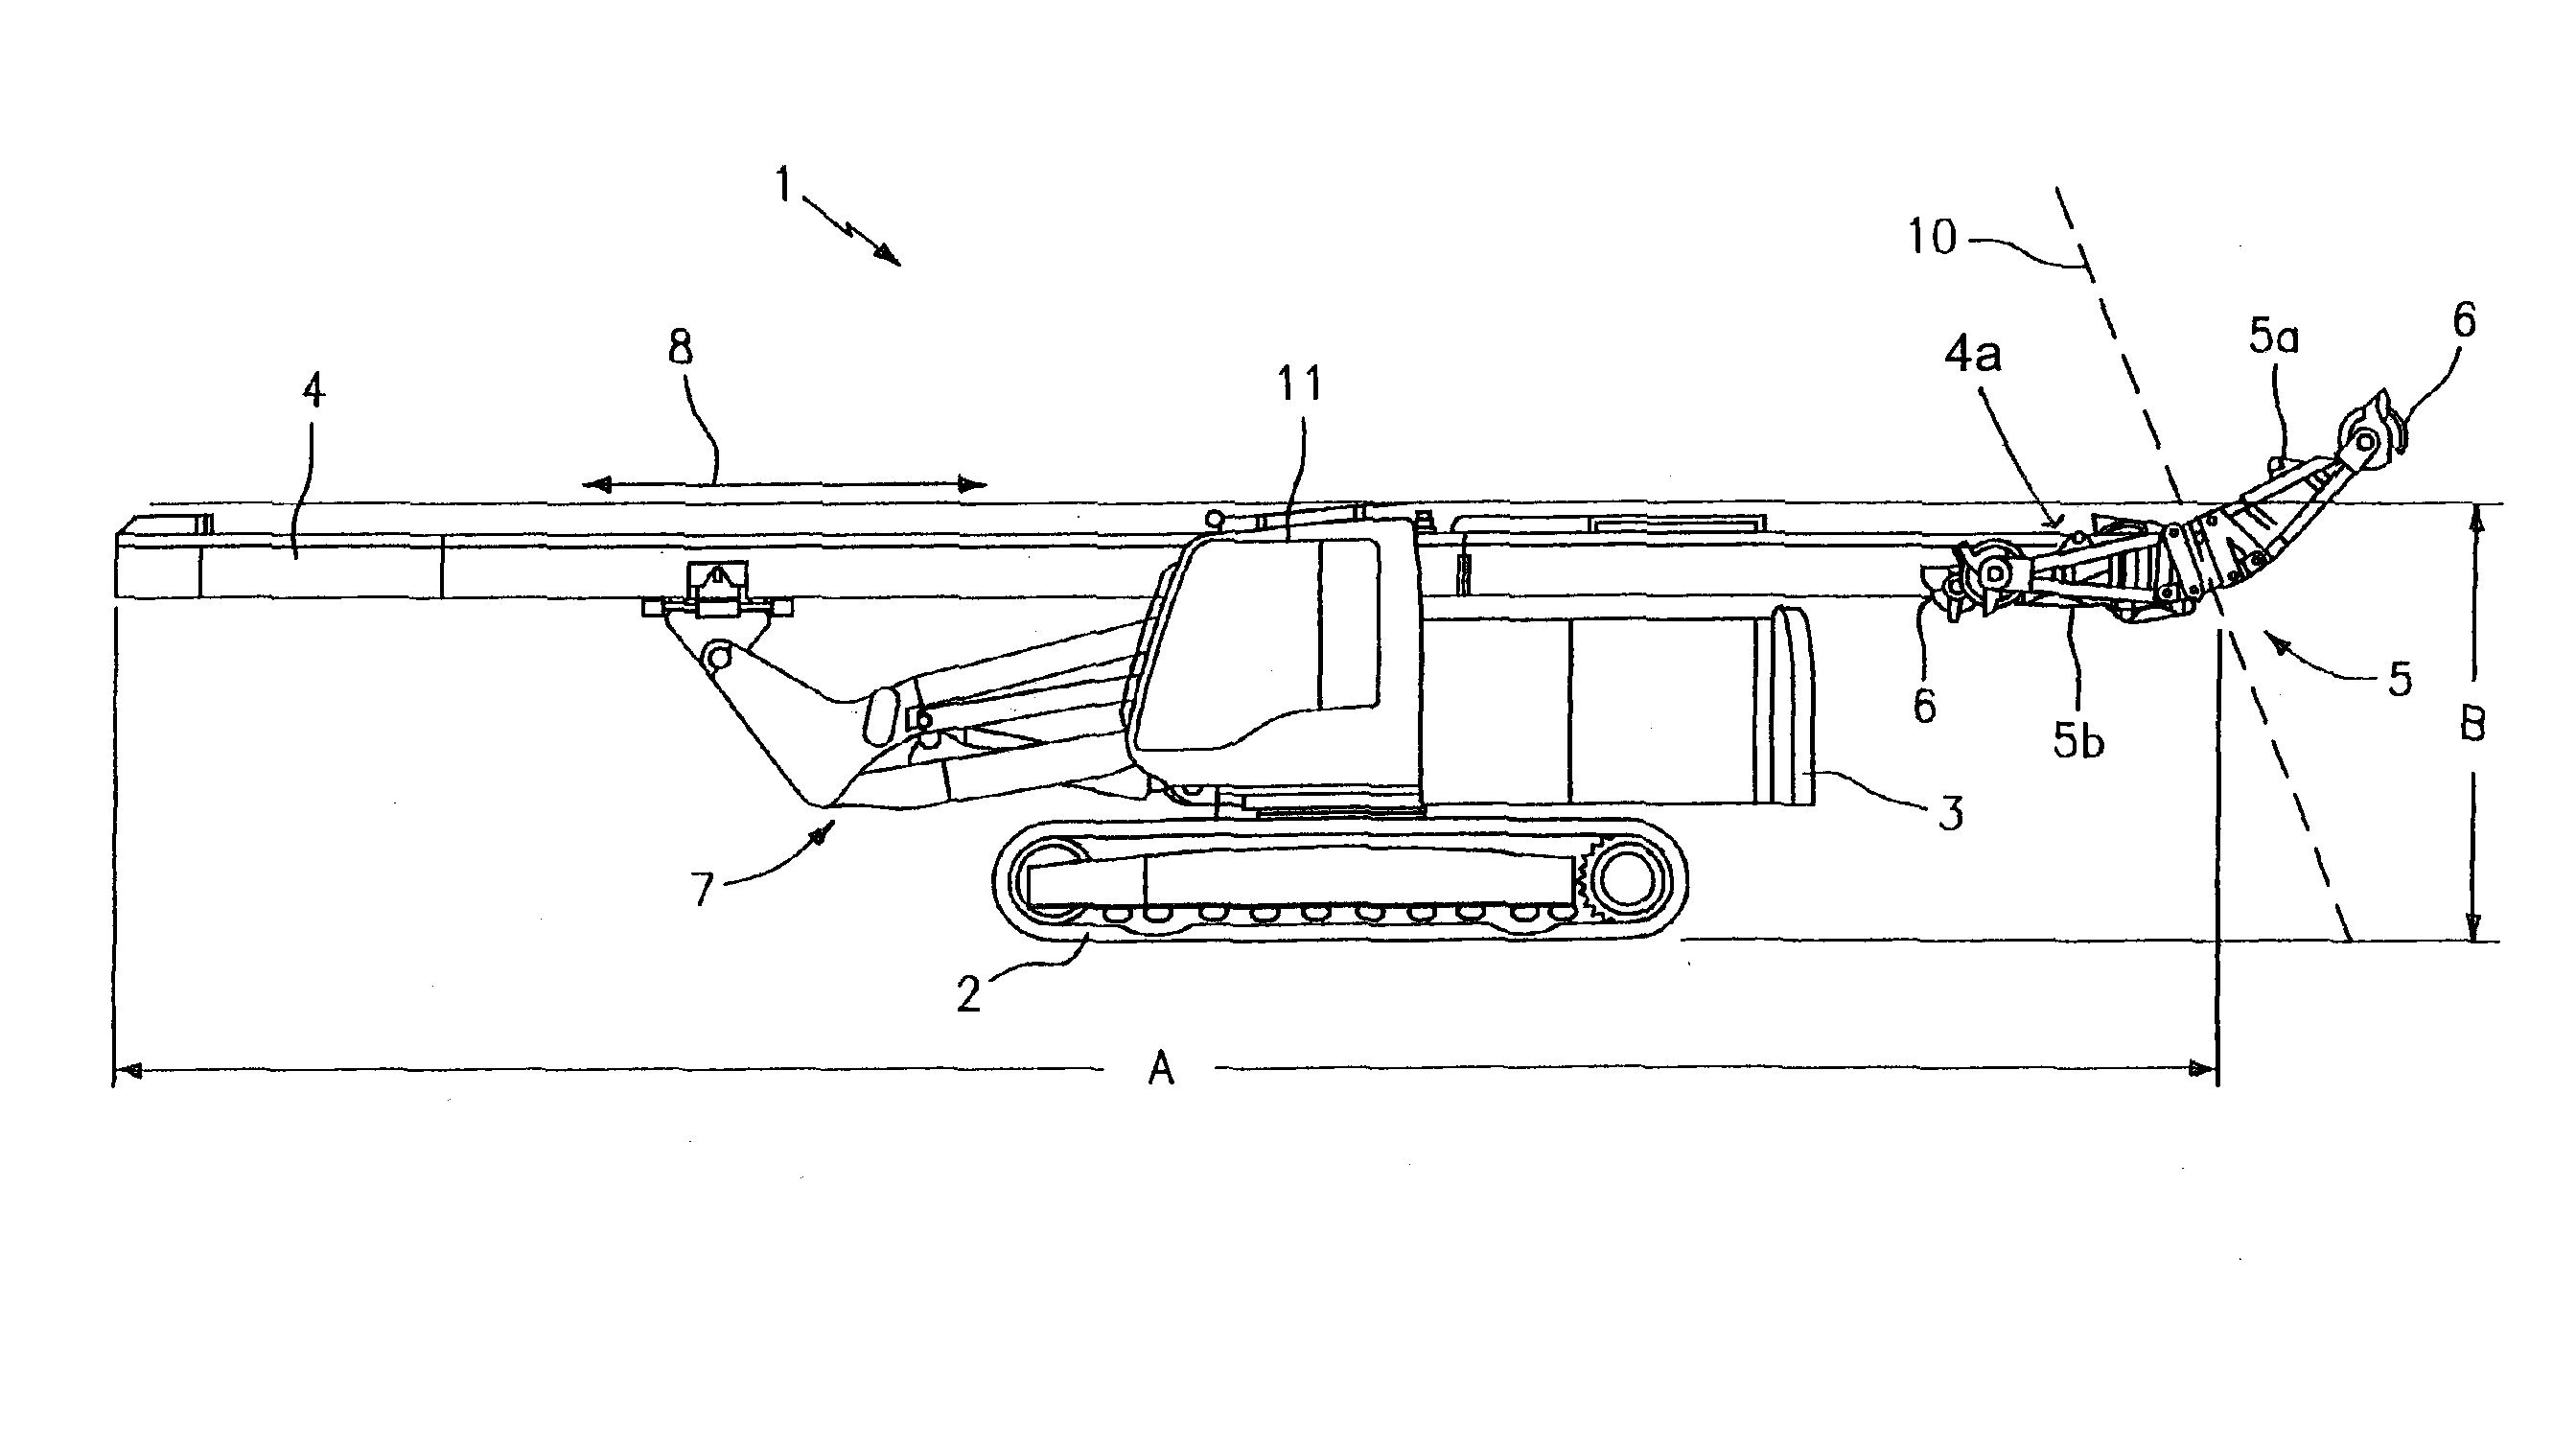 Piling and drilling rig with foldable deflection apparatus